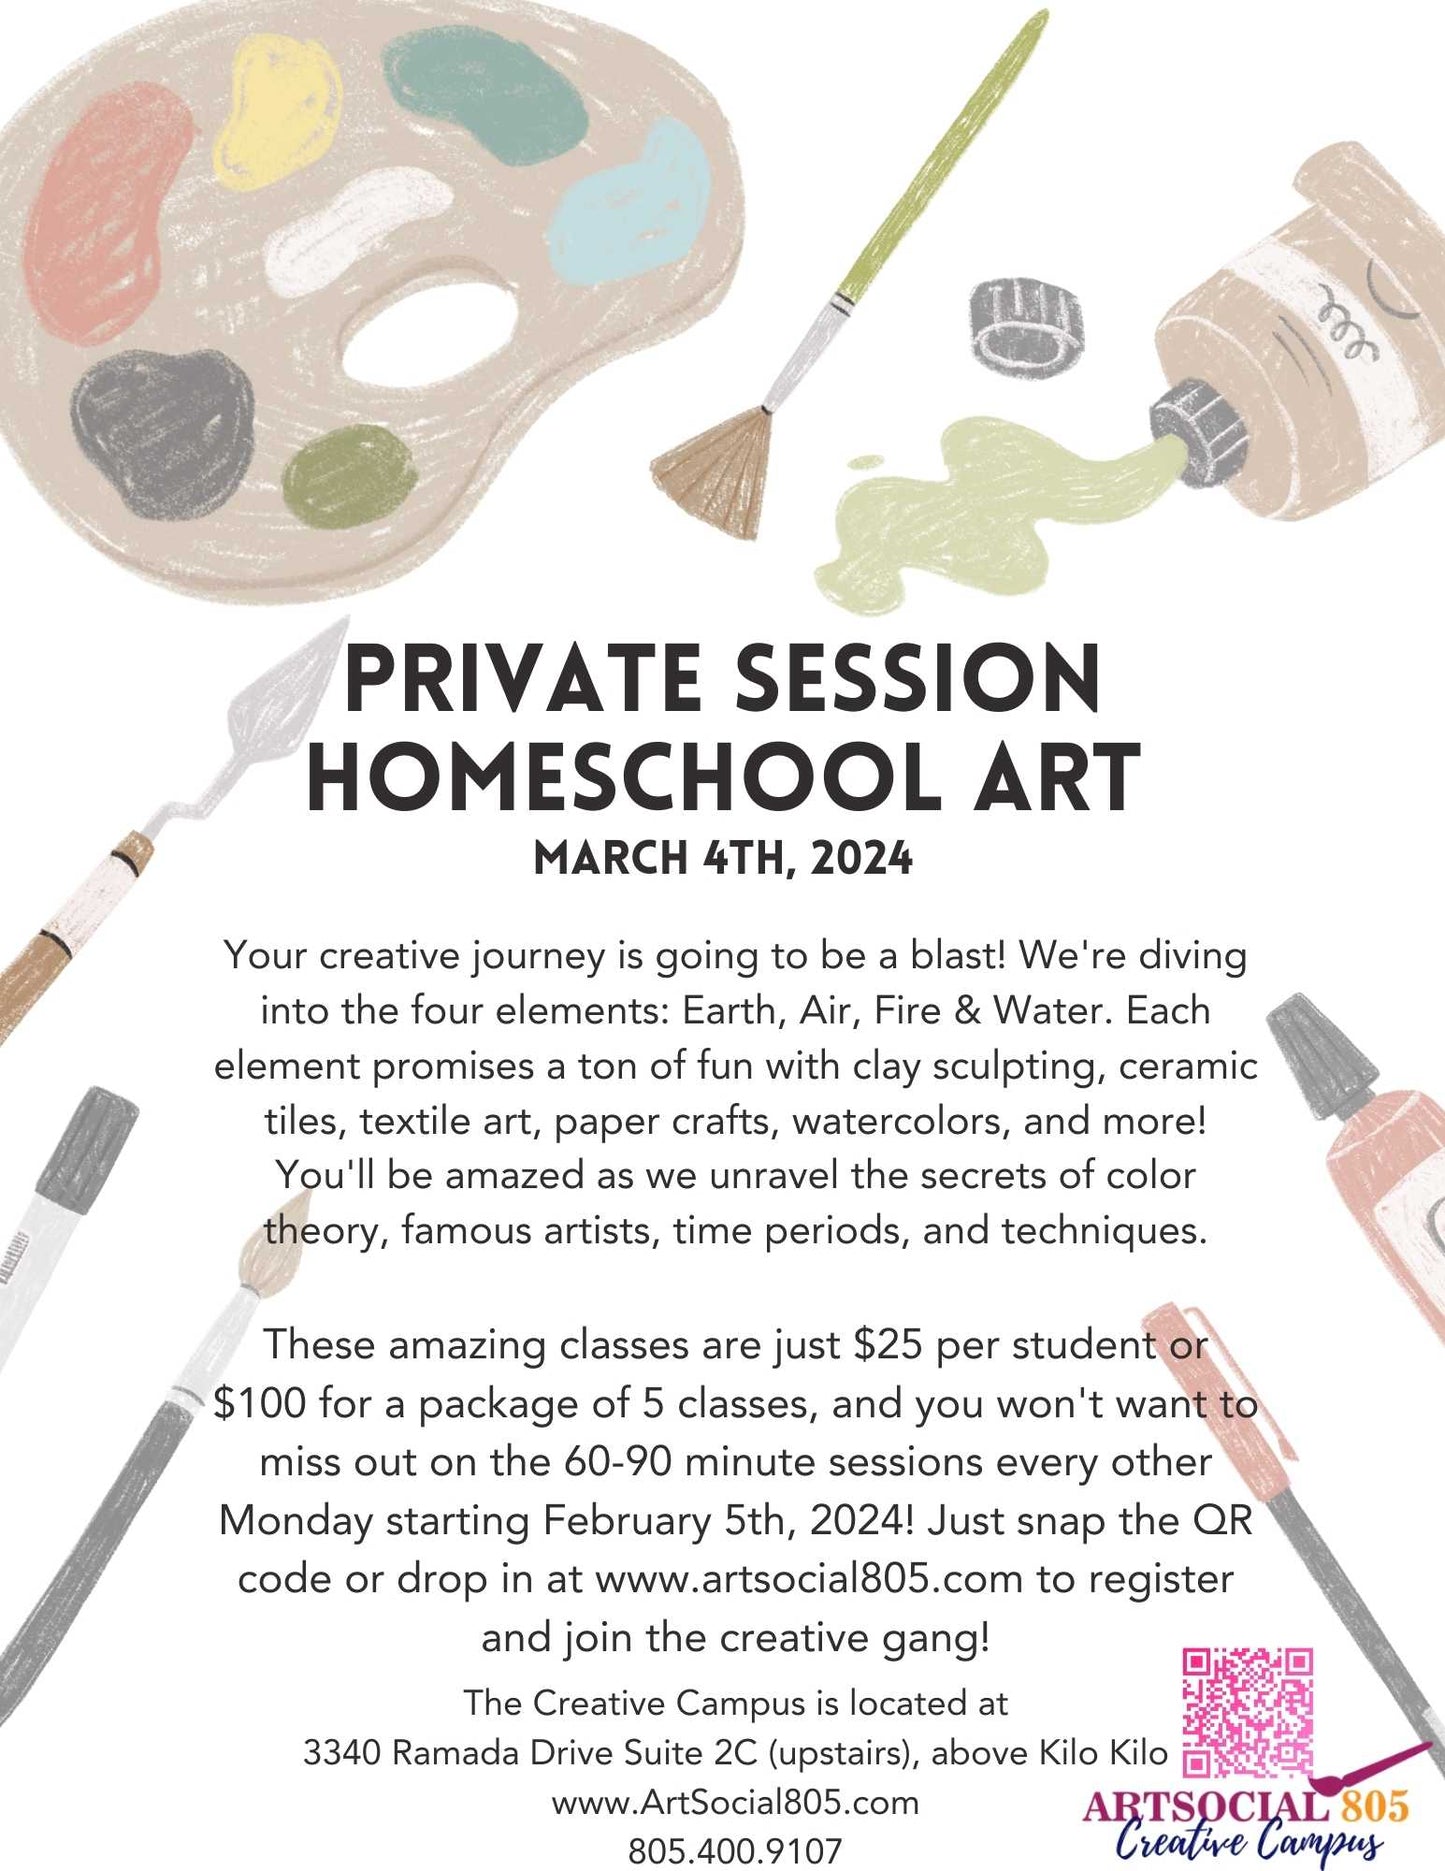 Private Home School Art Sessions at the ArtSocial 805 Creative Campus